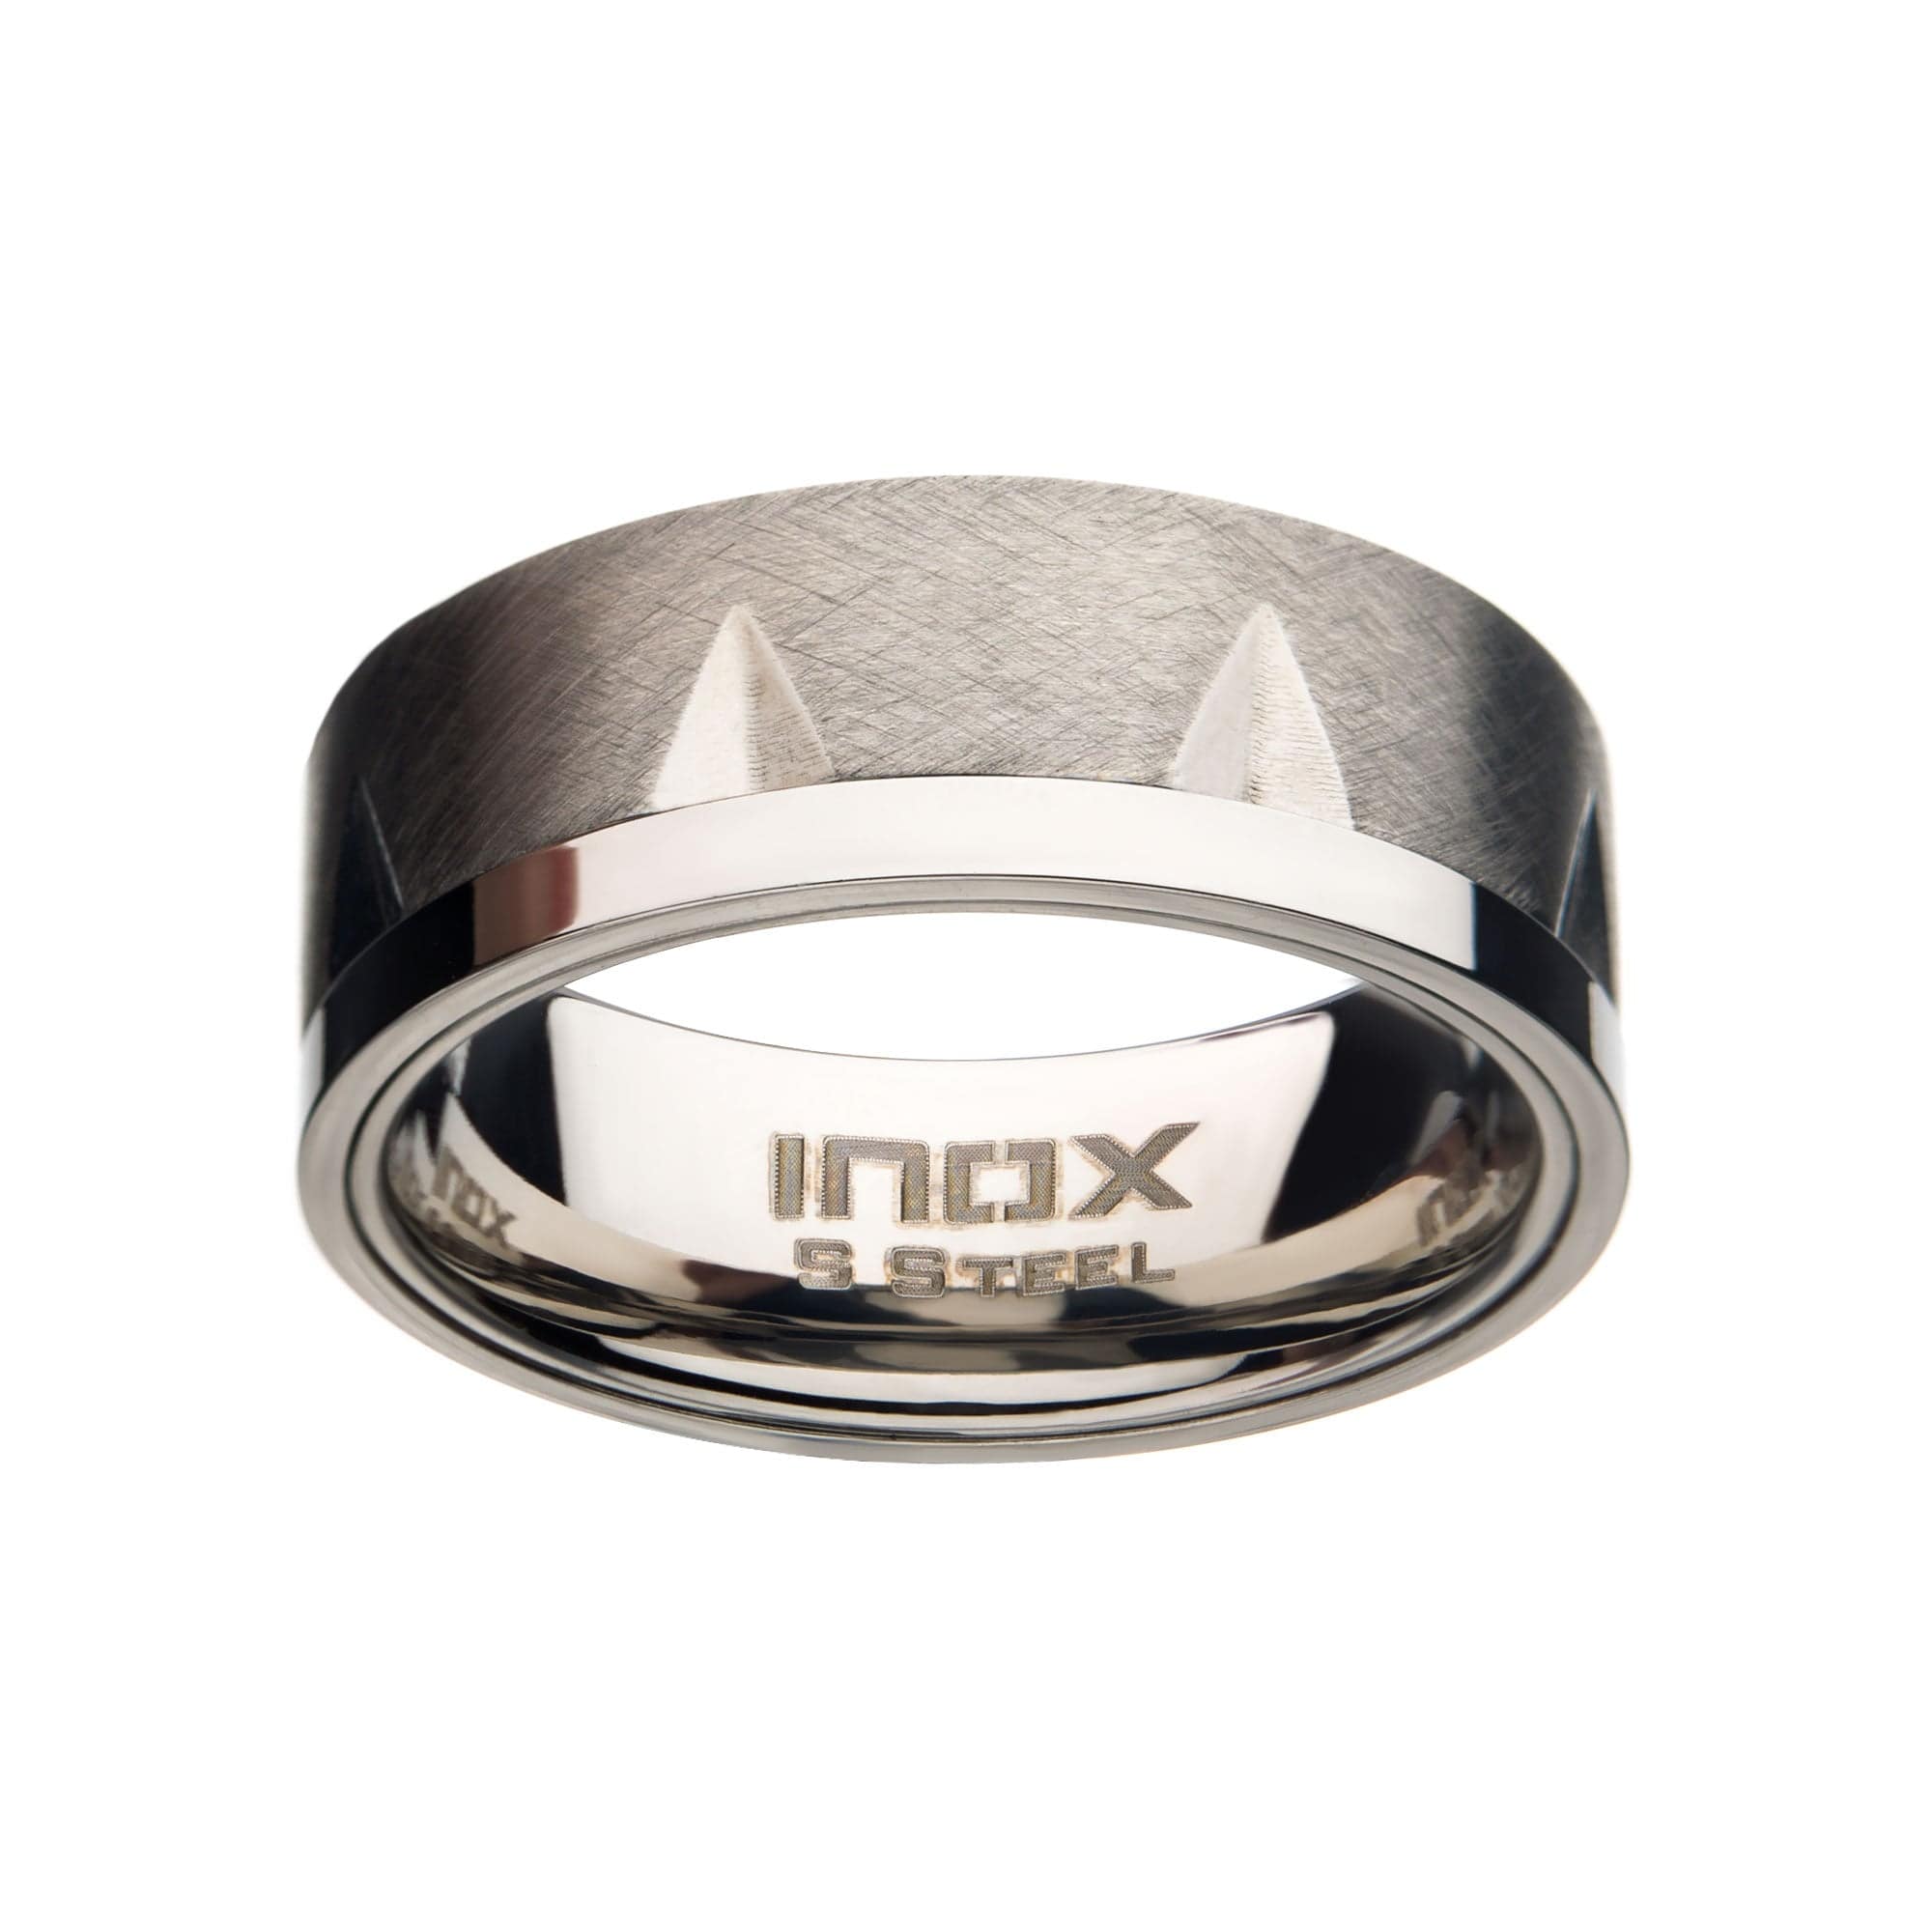 INOX JEWELRY Rings Silver Tone Stainless Steel Matte and Polish Finish Accent Notch Band Ring